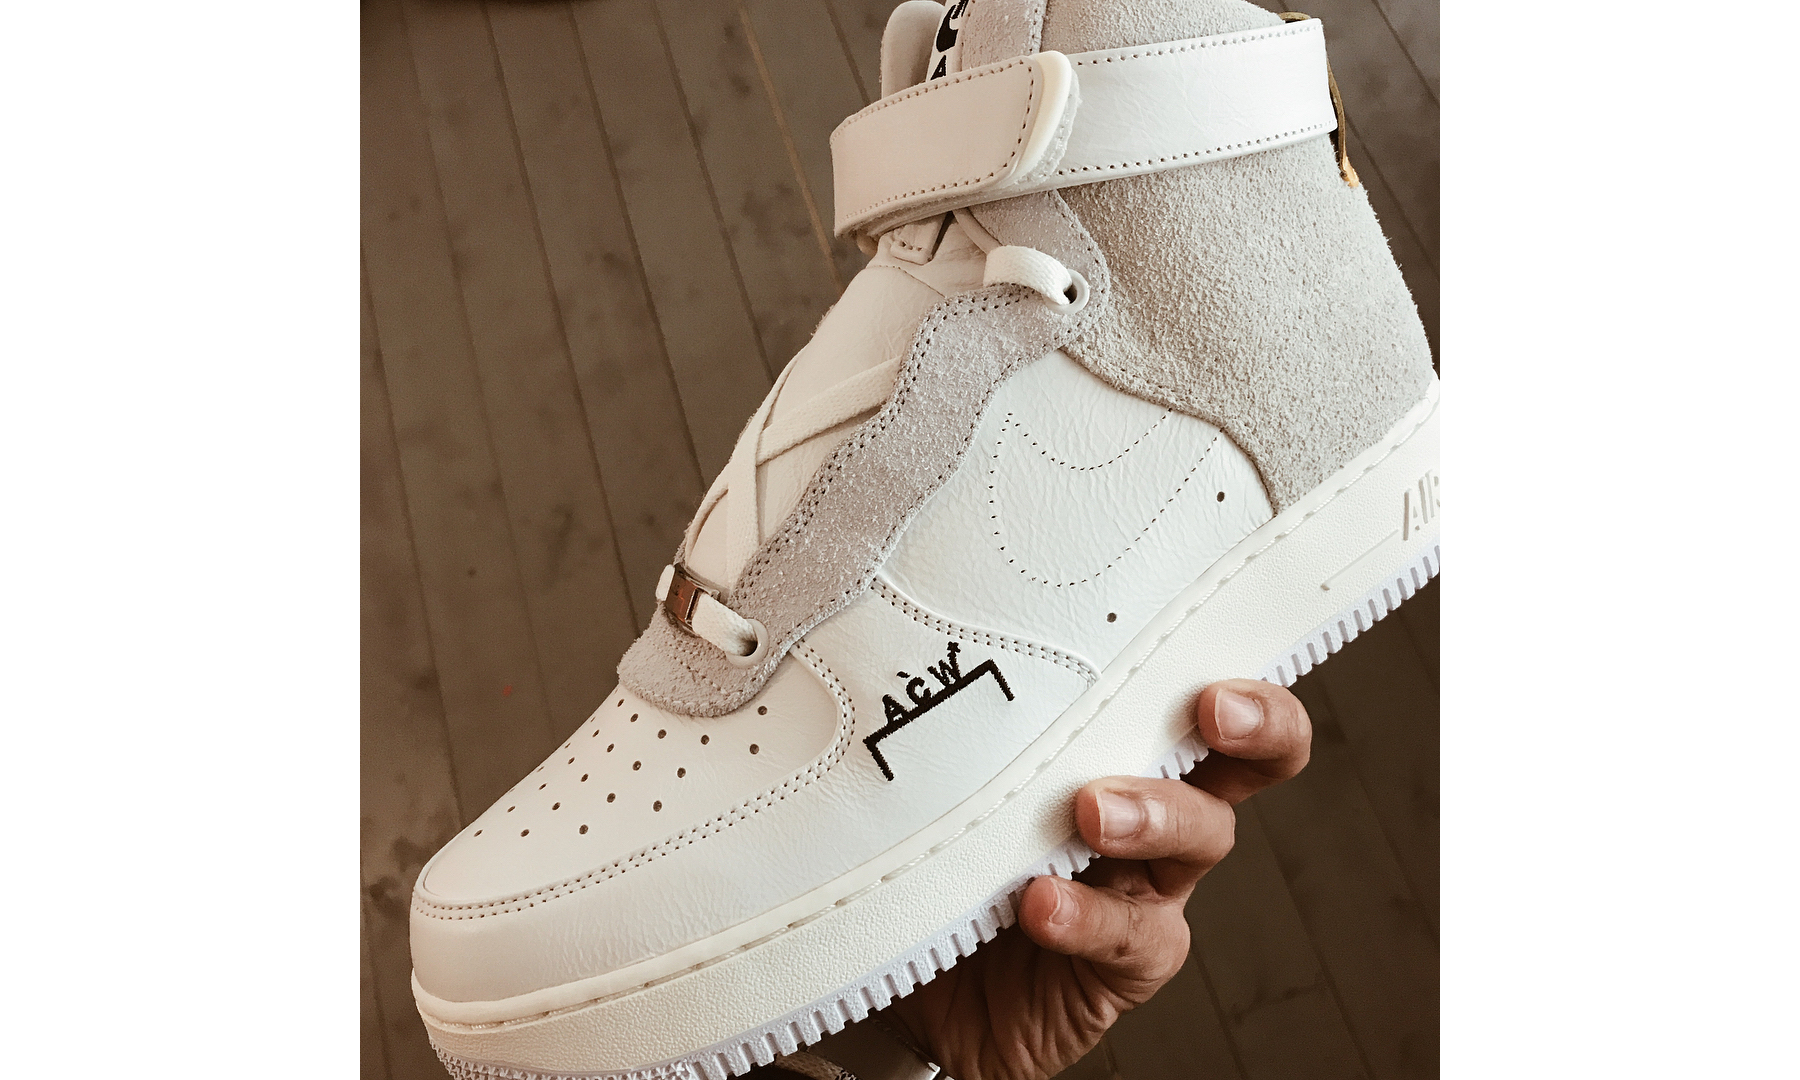 Kevin Poon 展示 A-COLD-WALL* x Nike 联名 Air Force 1 出色质感